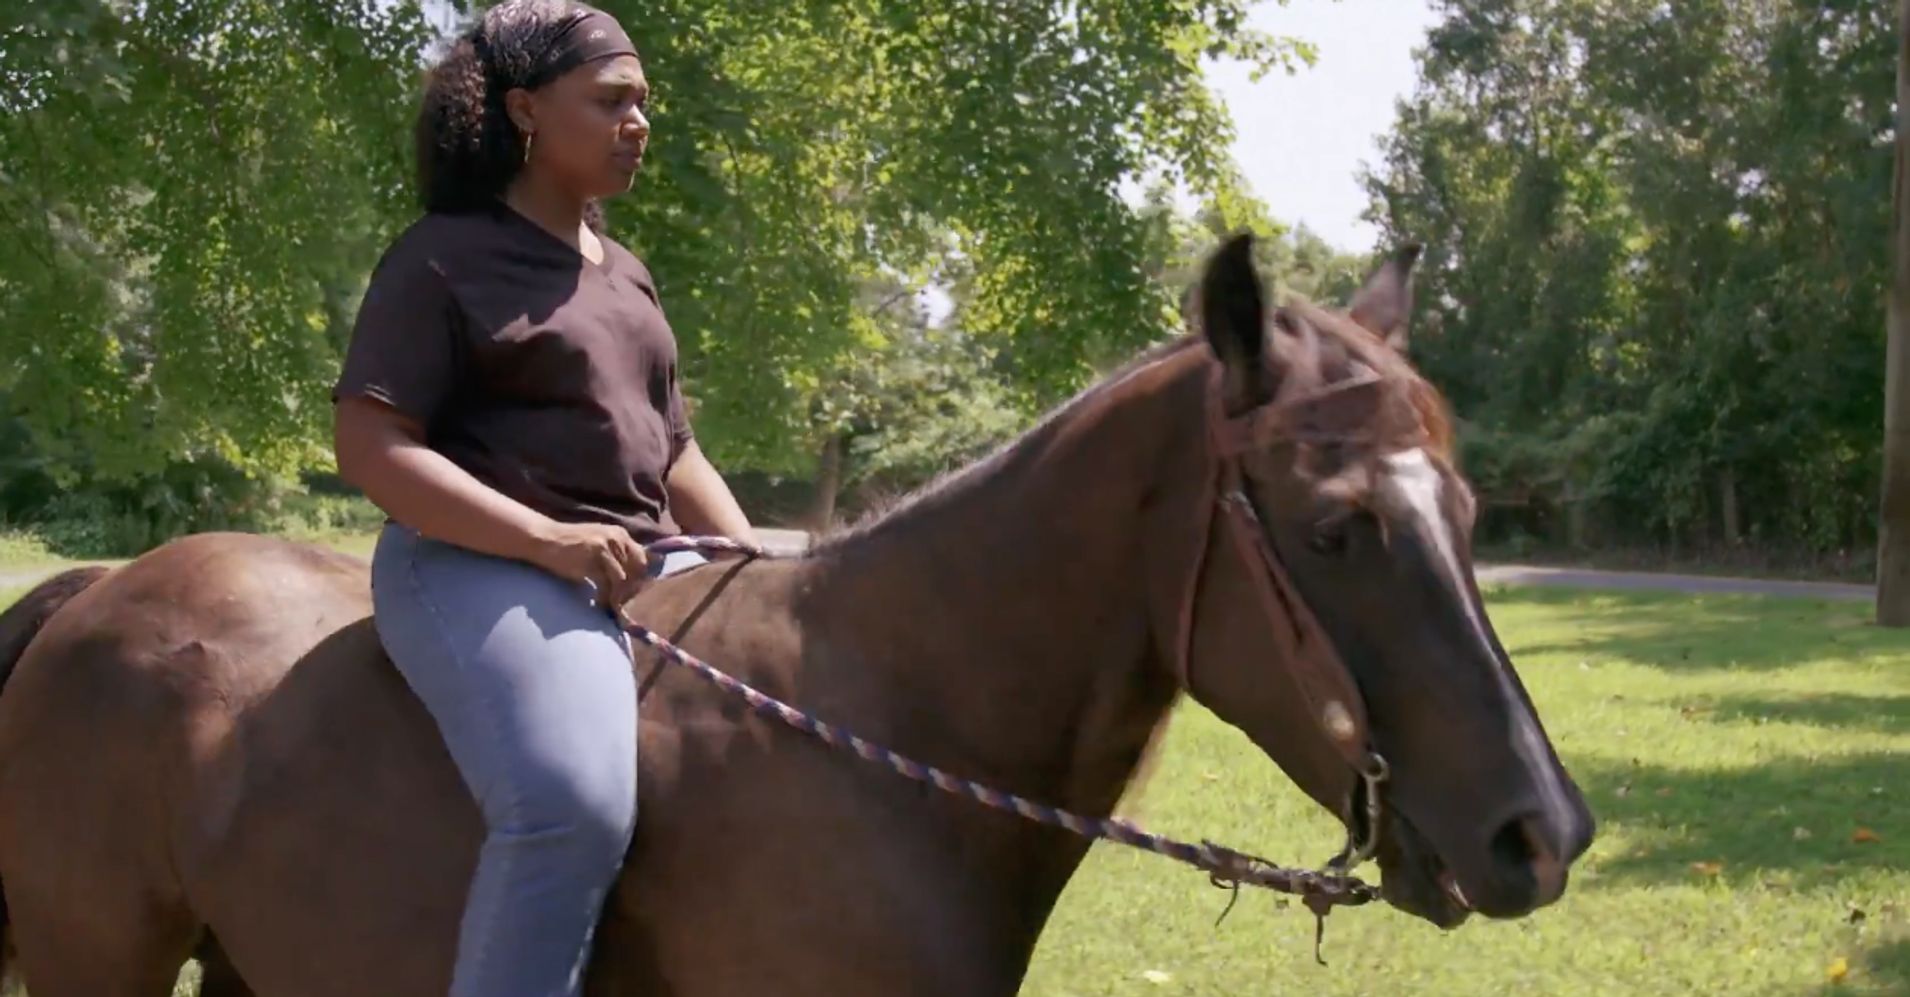 How These Cowgirls Of Color Are Shaking Up The Male Dominated Rodeo